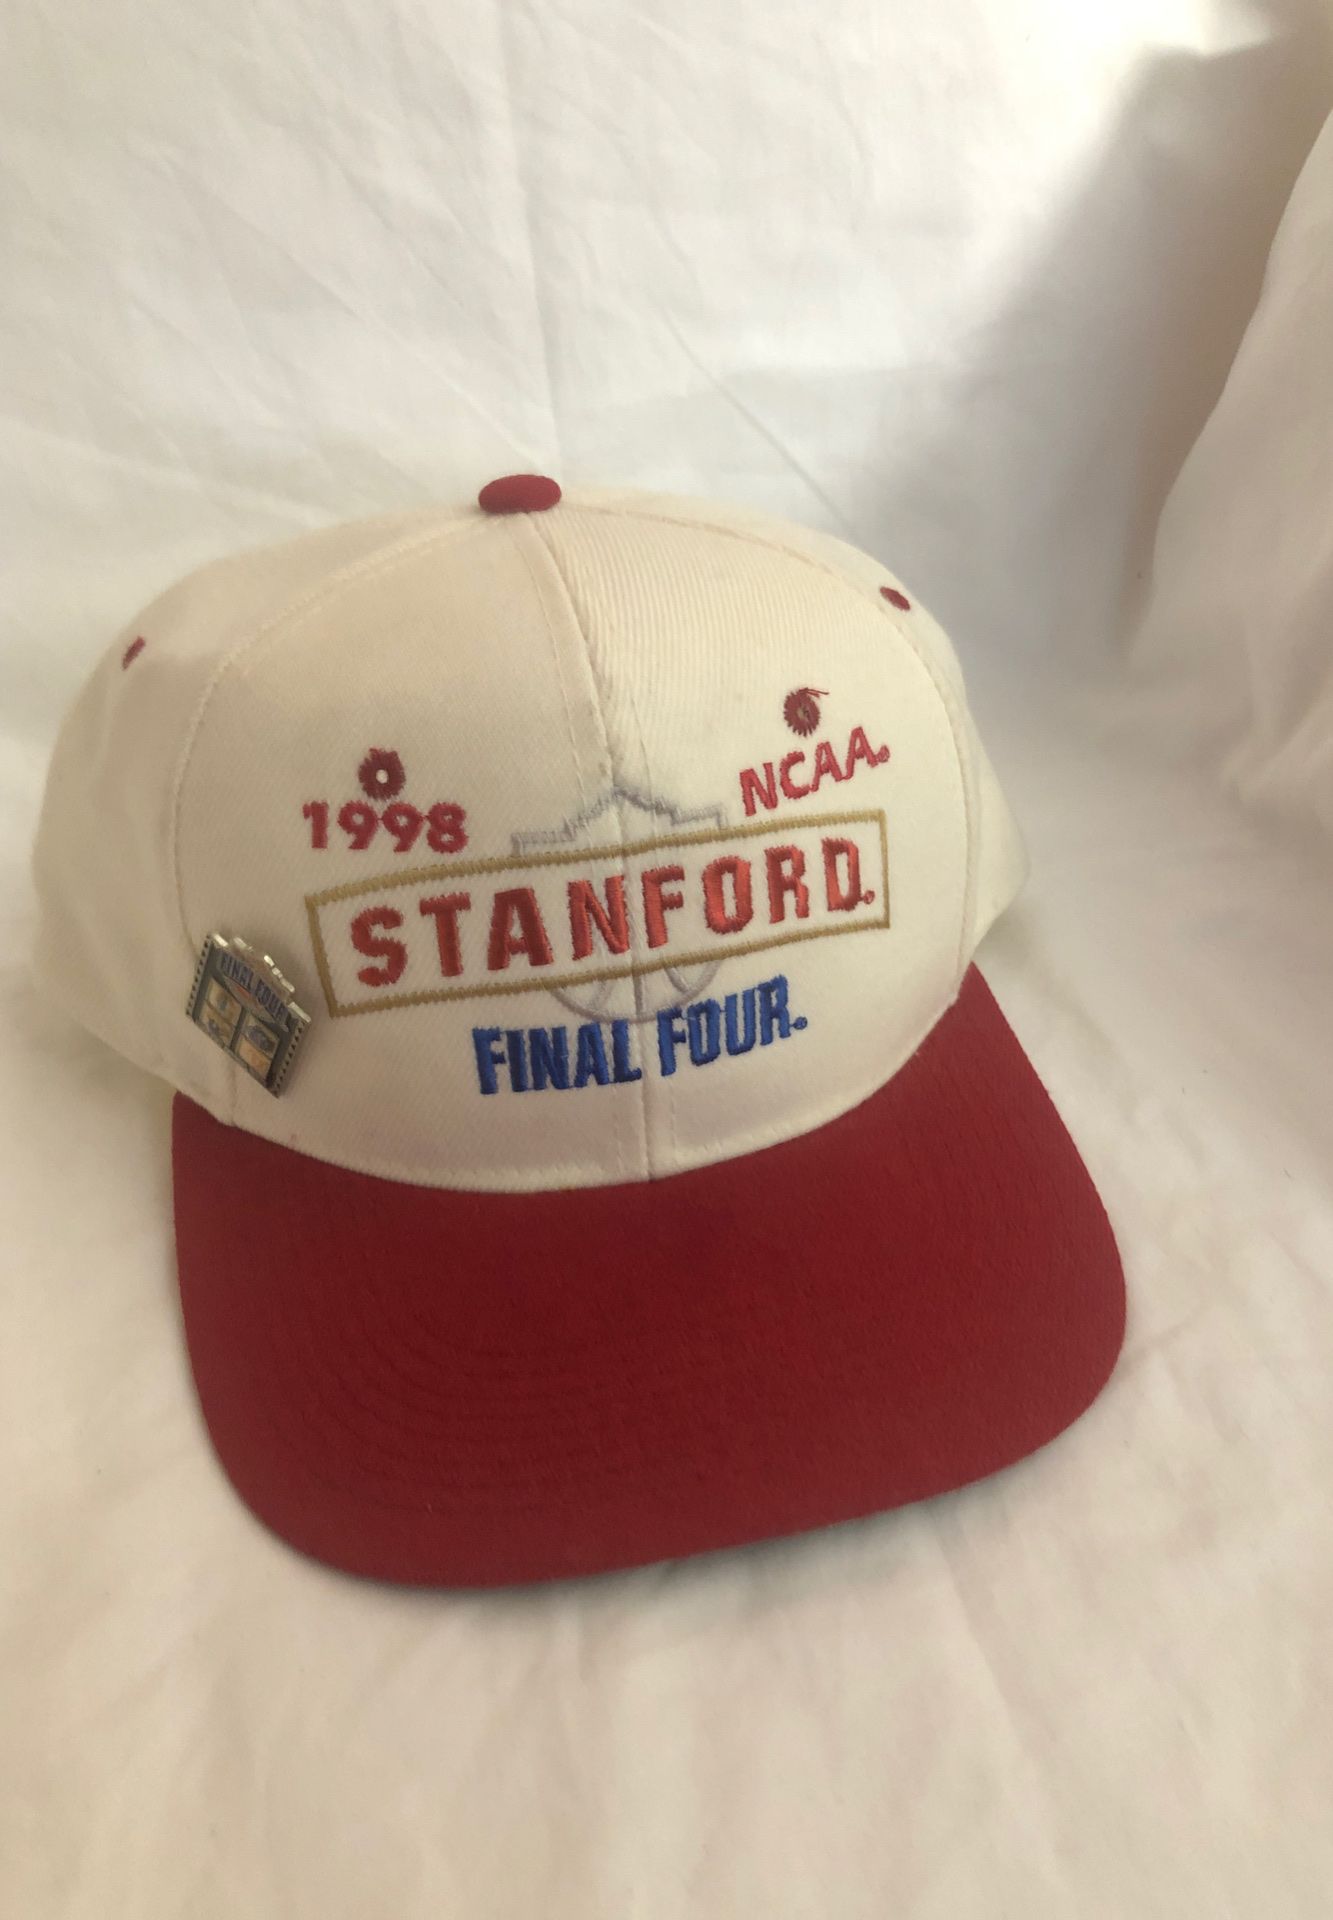 1998 NCAA Stanford Final Four SnapBack with pin